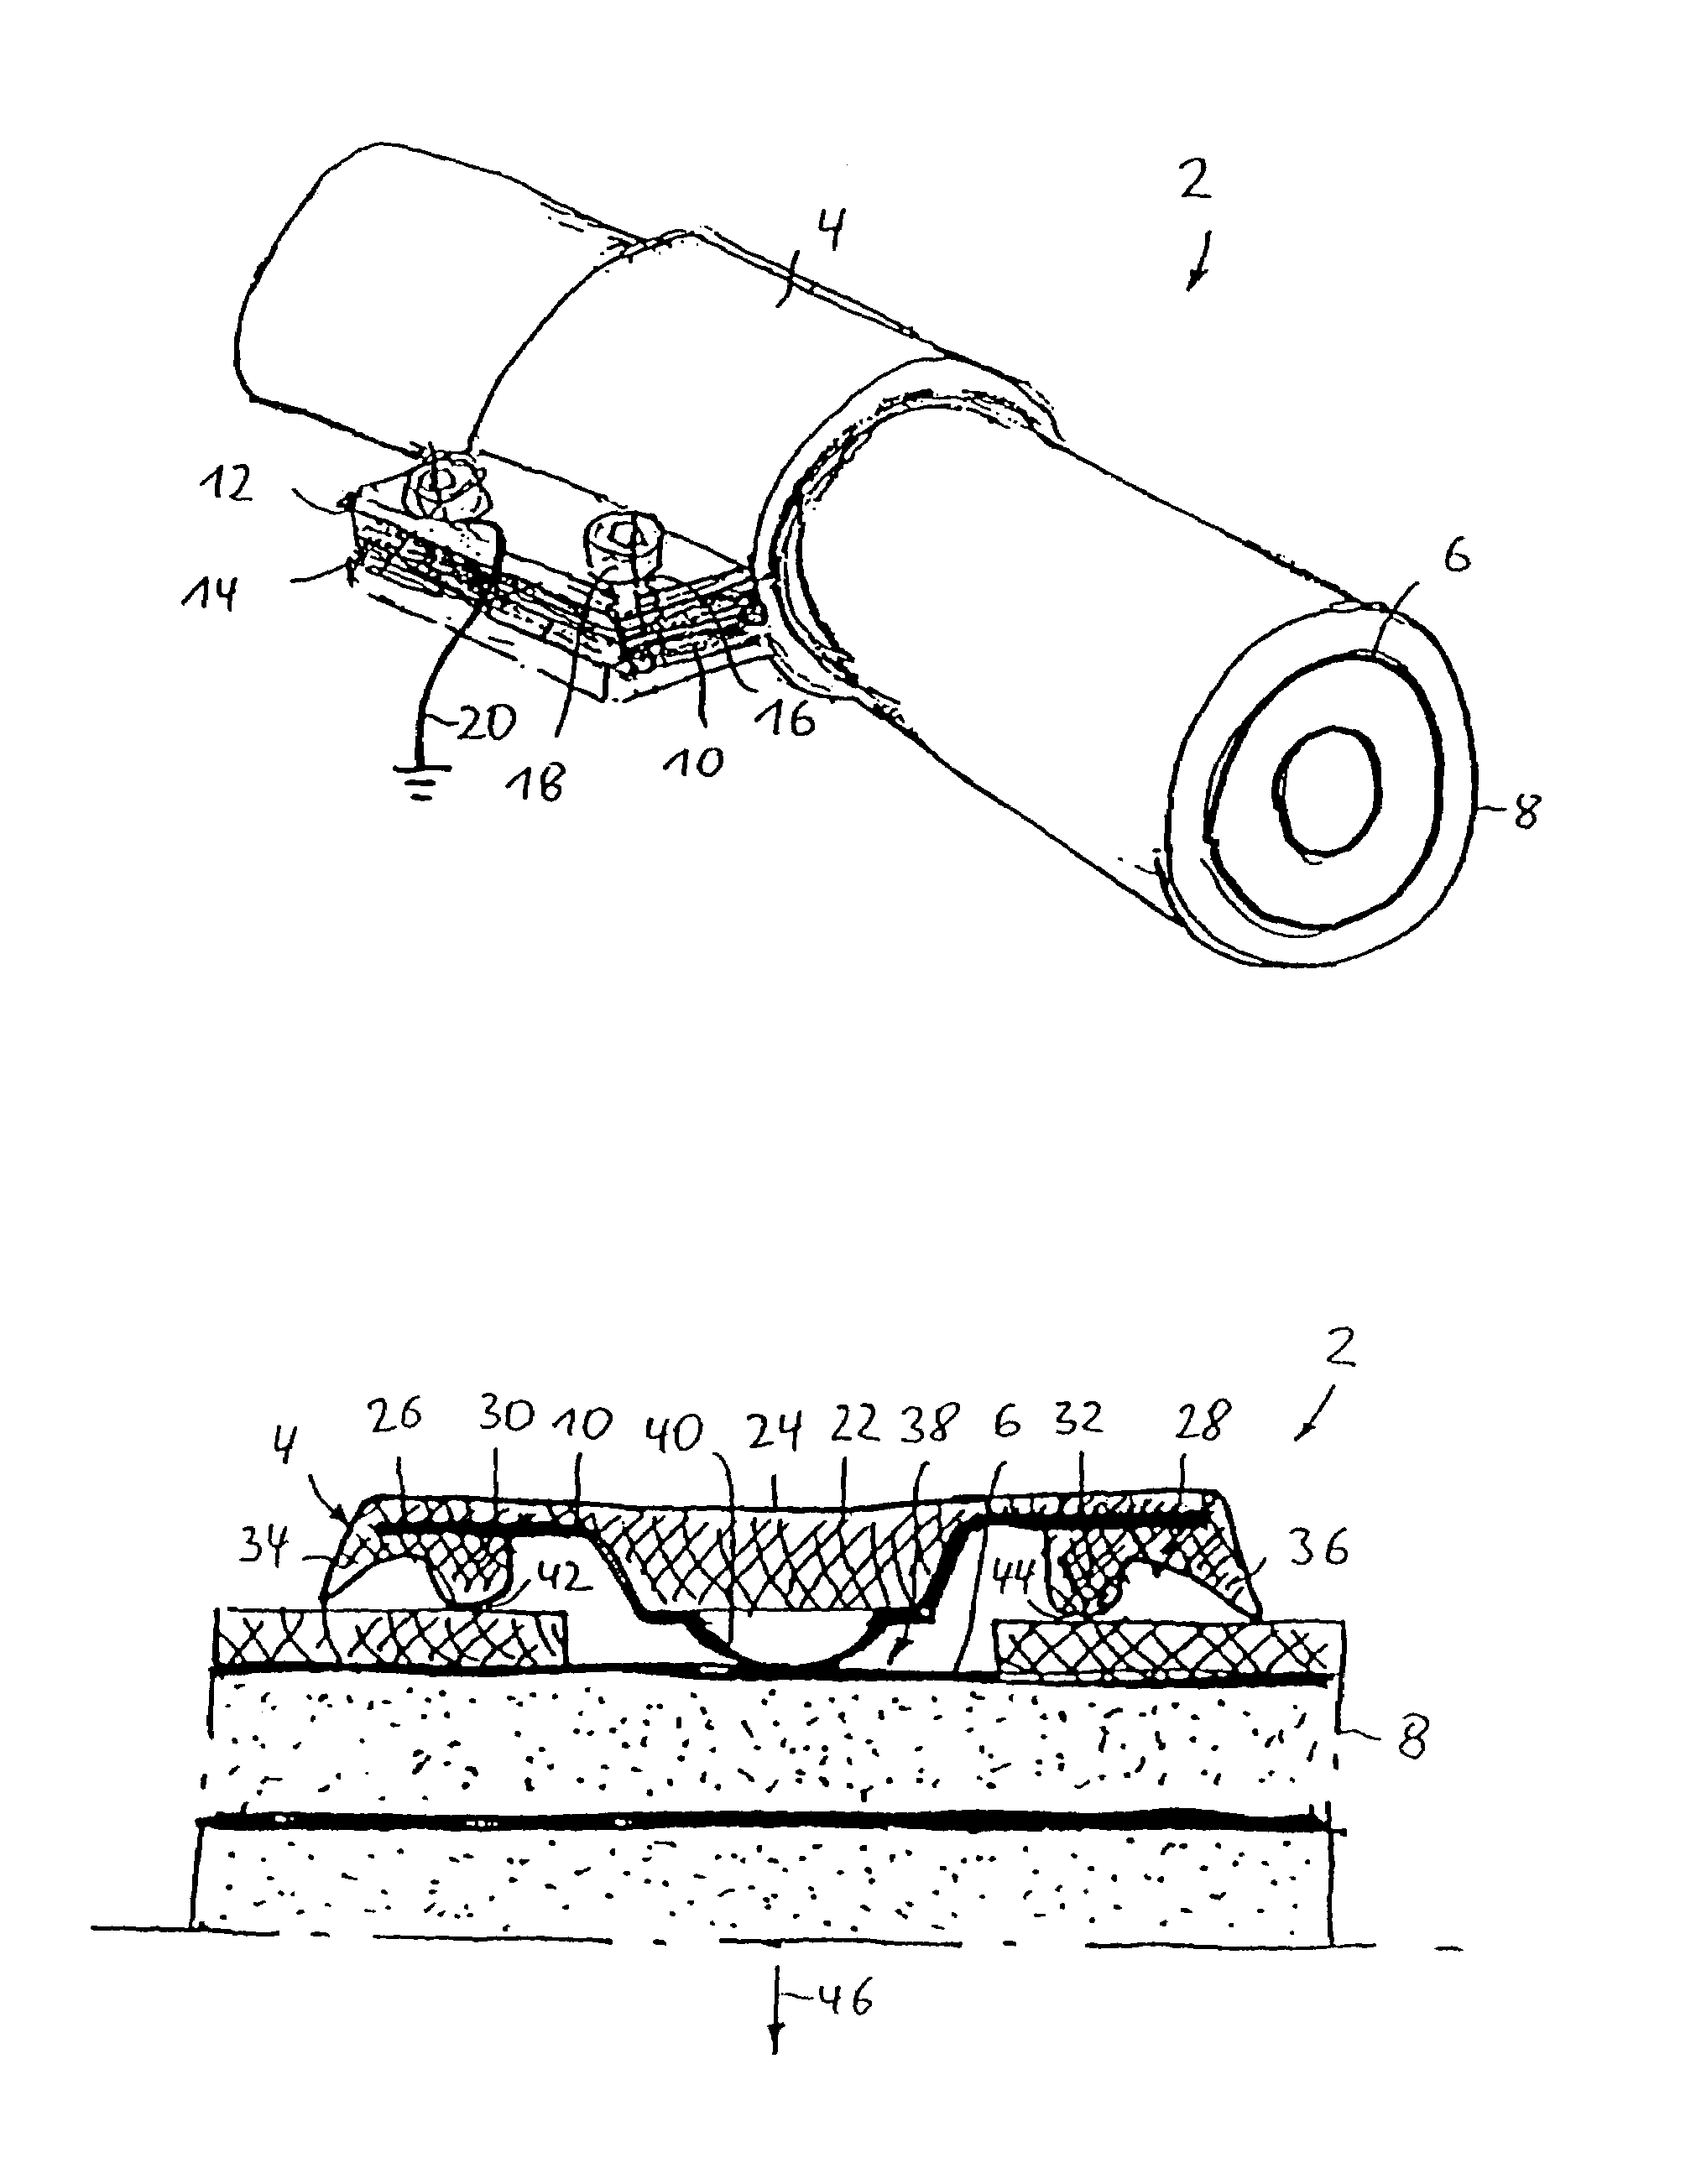 Device for contacting in particular elongated, illustratively substantially cylindrical bodies such as cables or pipes/tubes